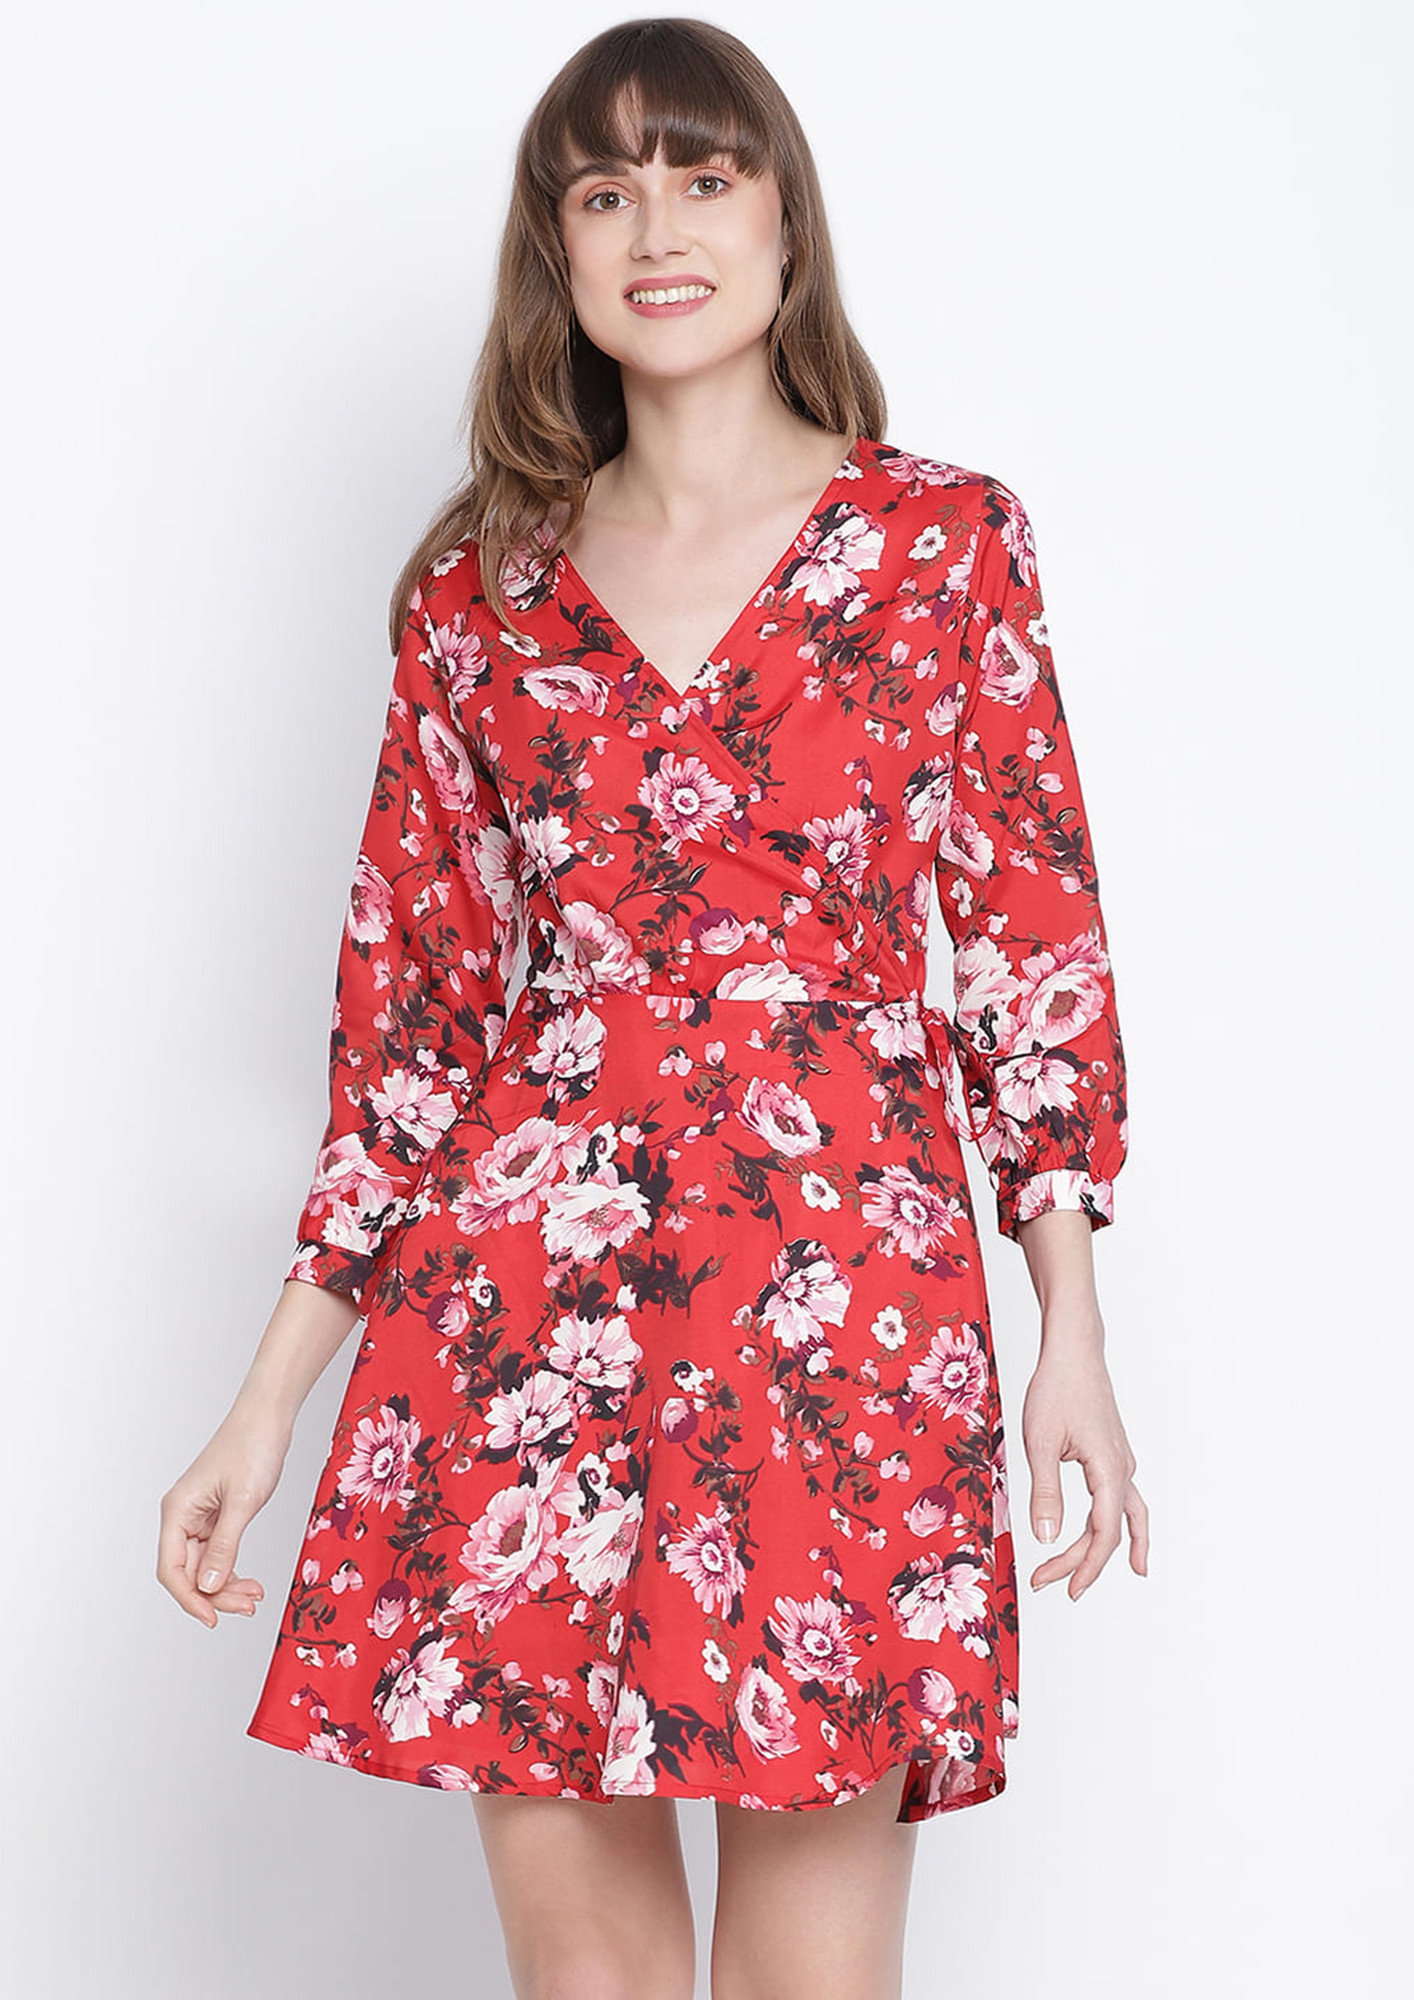 Draax Fashions Women Red Floral A-Line Dress